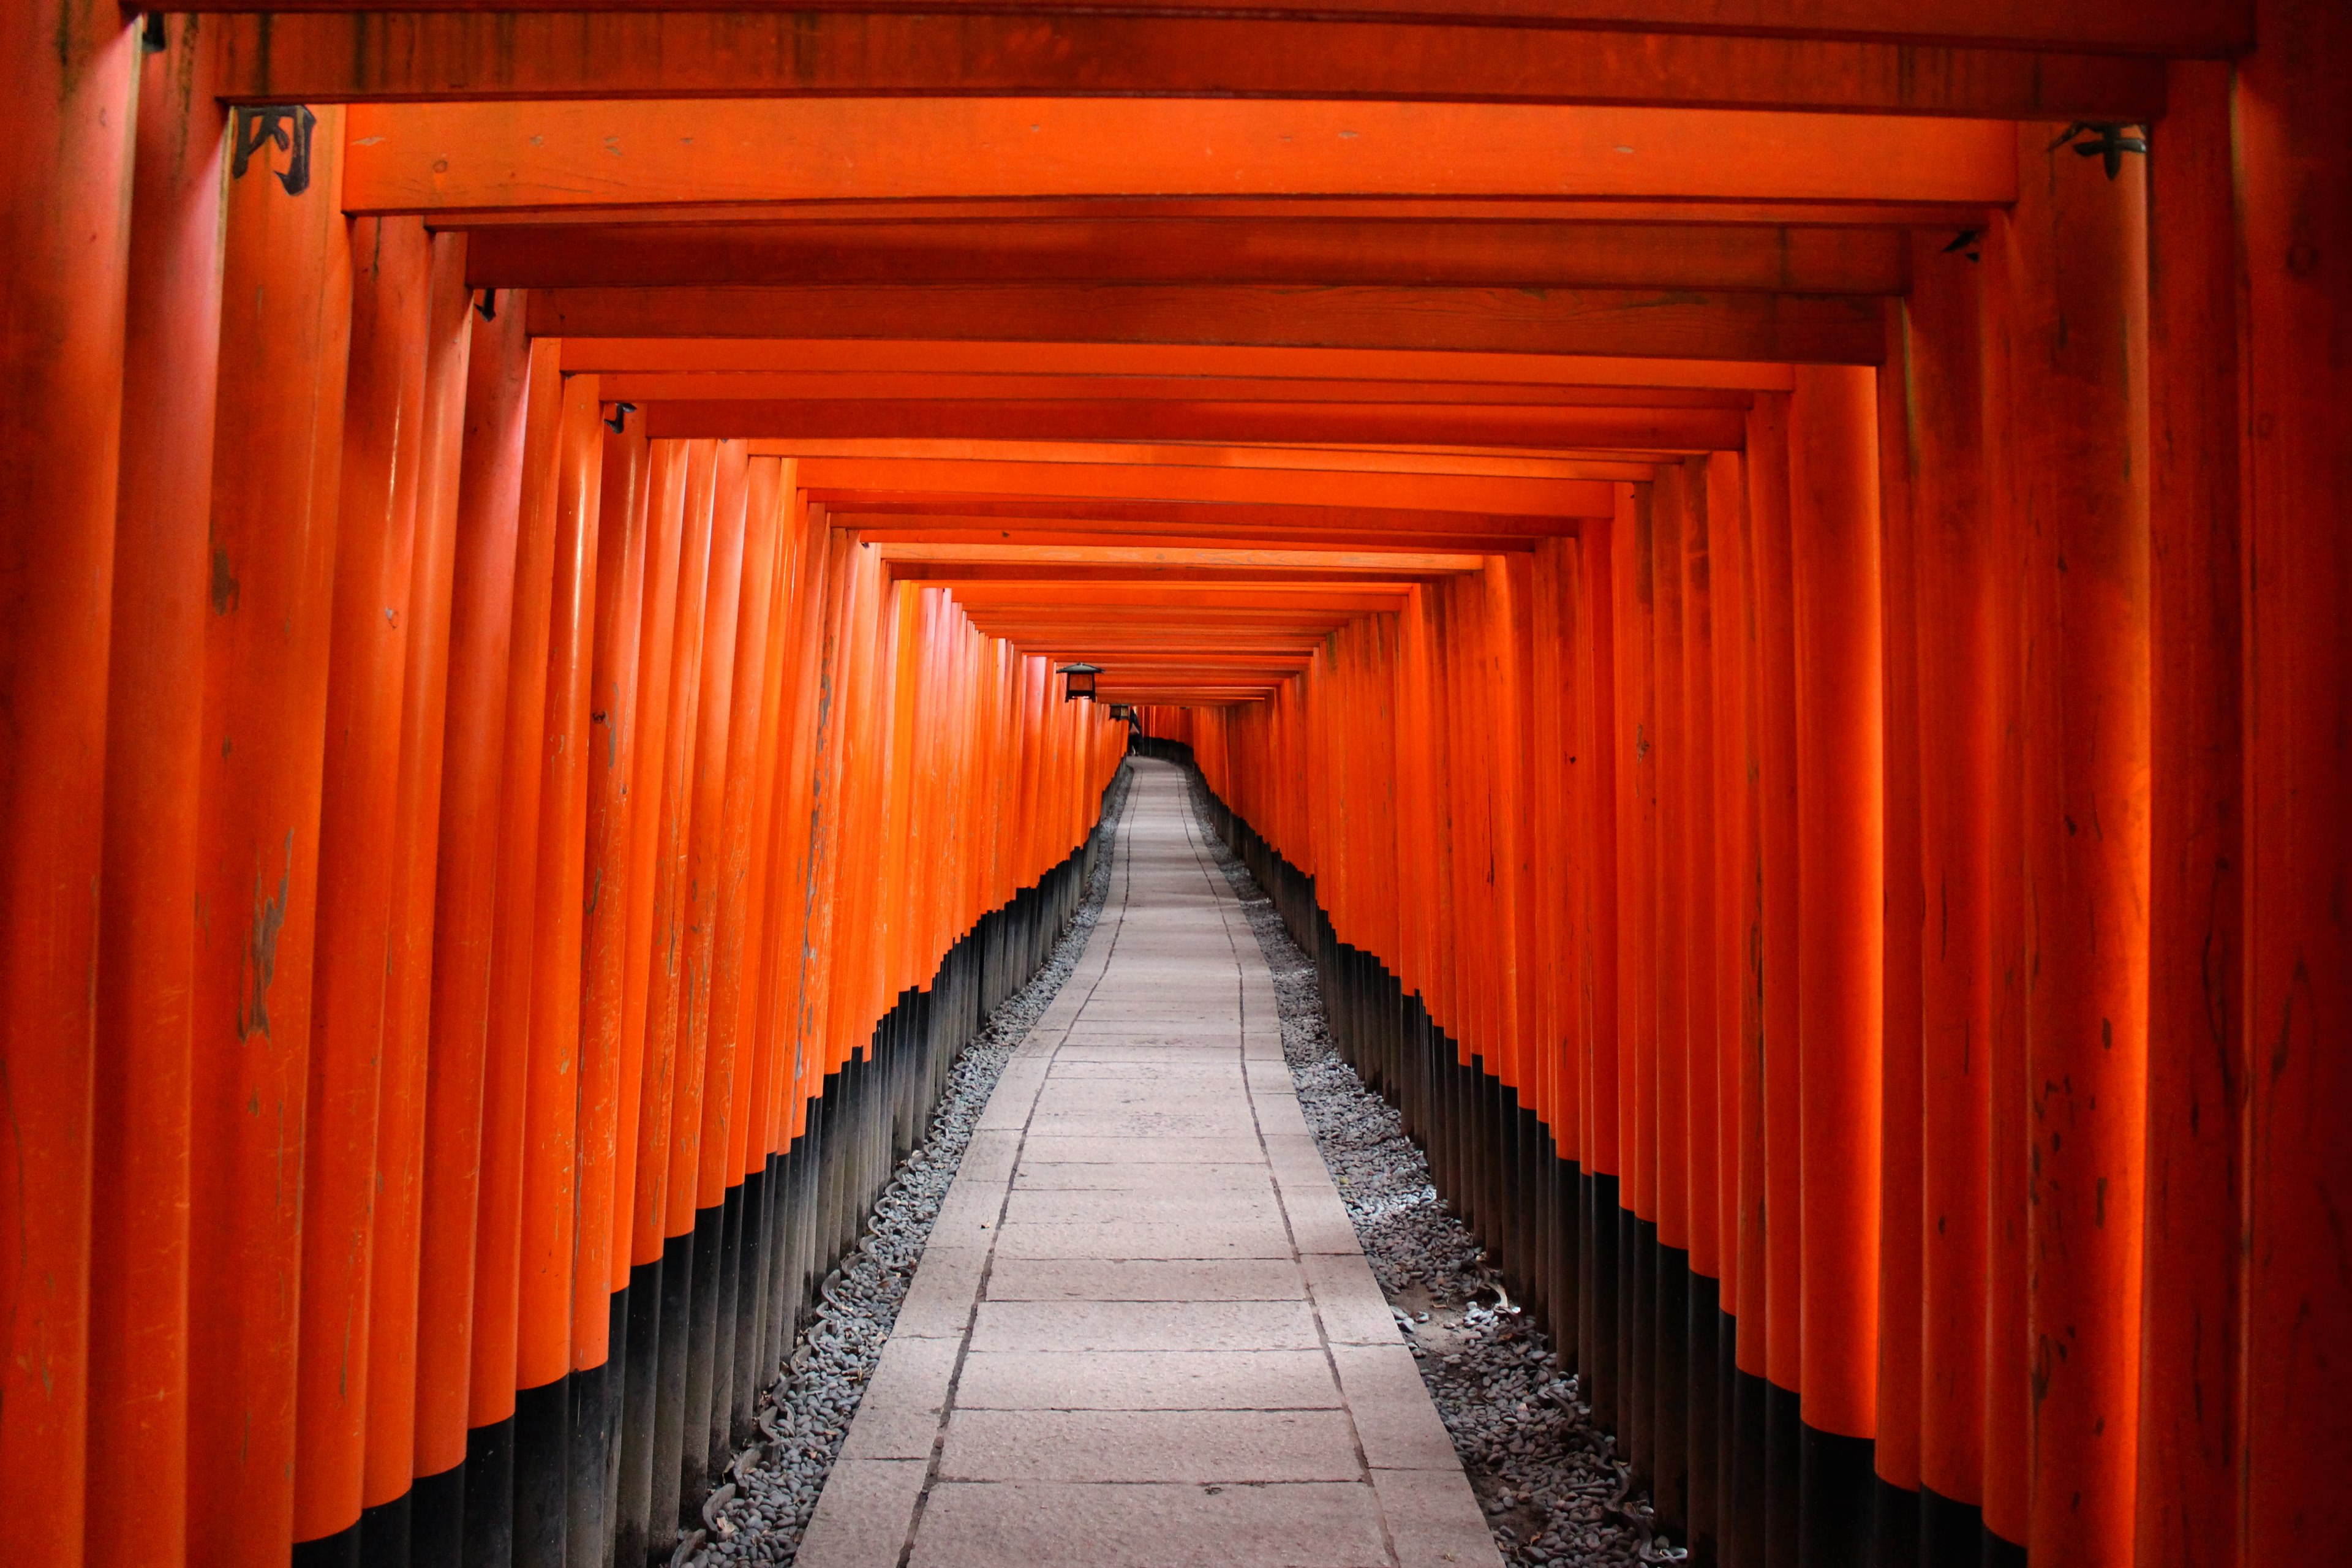 #3840x2560 Orange Architecture In A Hallway That Leads - Fushimi Inari , HD Wallpaper & Backgrounds